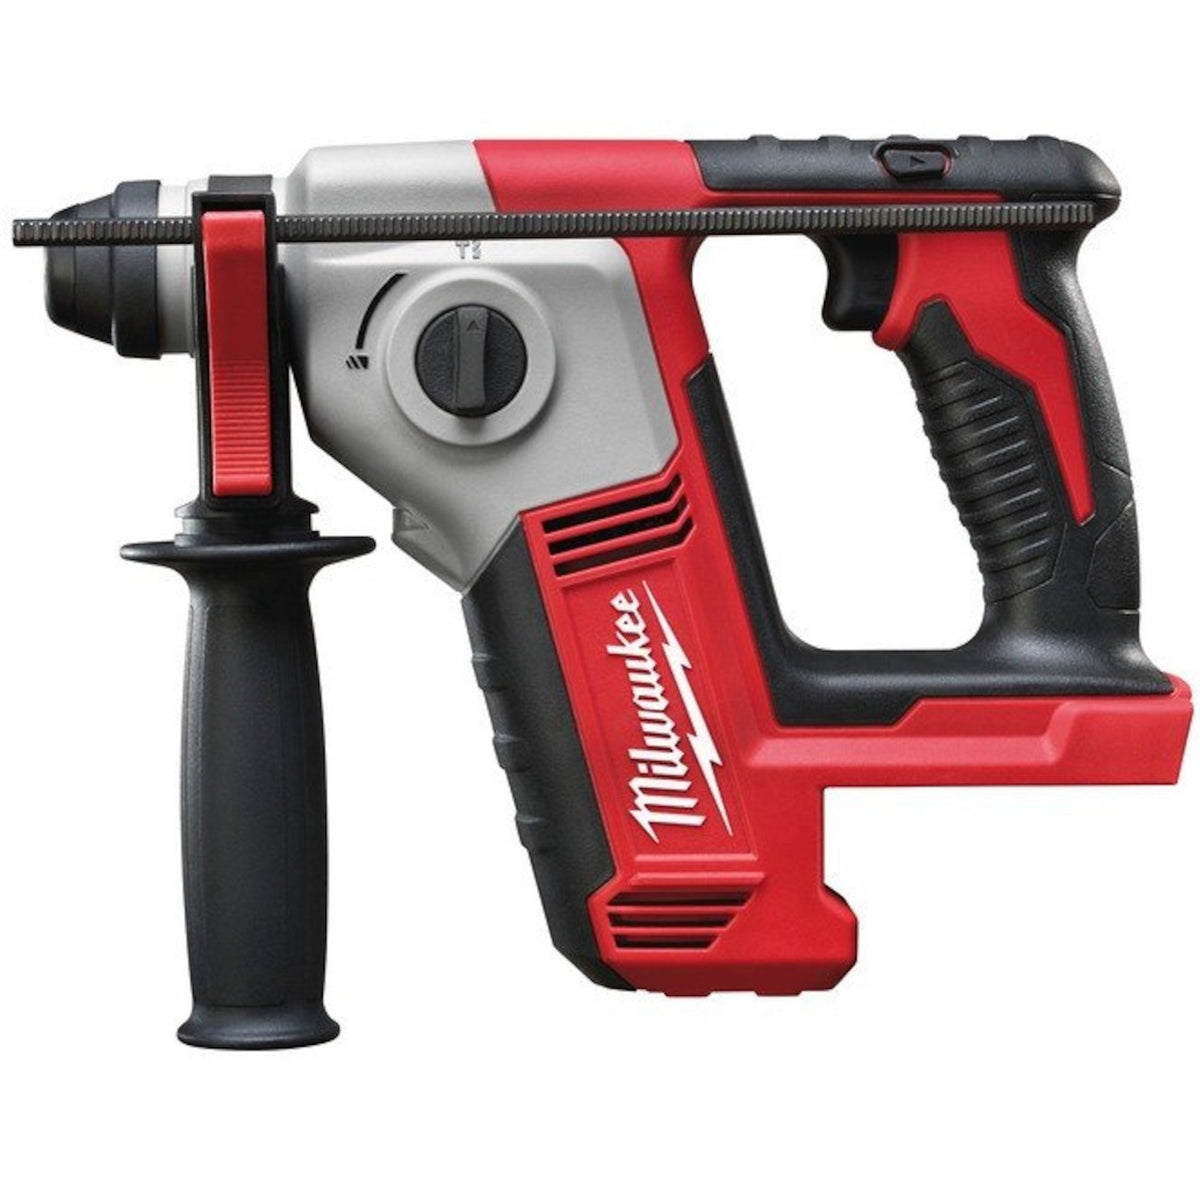 Milwaukee M18BH-0 18V SDS 2 Mode Hammer Drill with 1 x 5.0Ah Battery & Charger